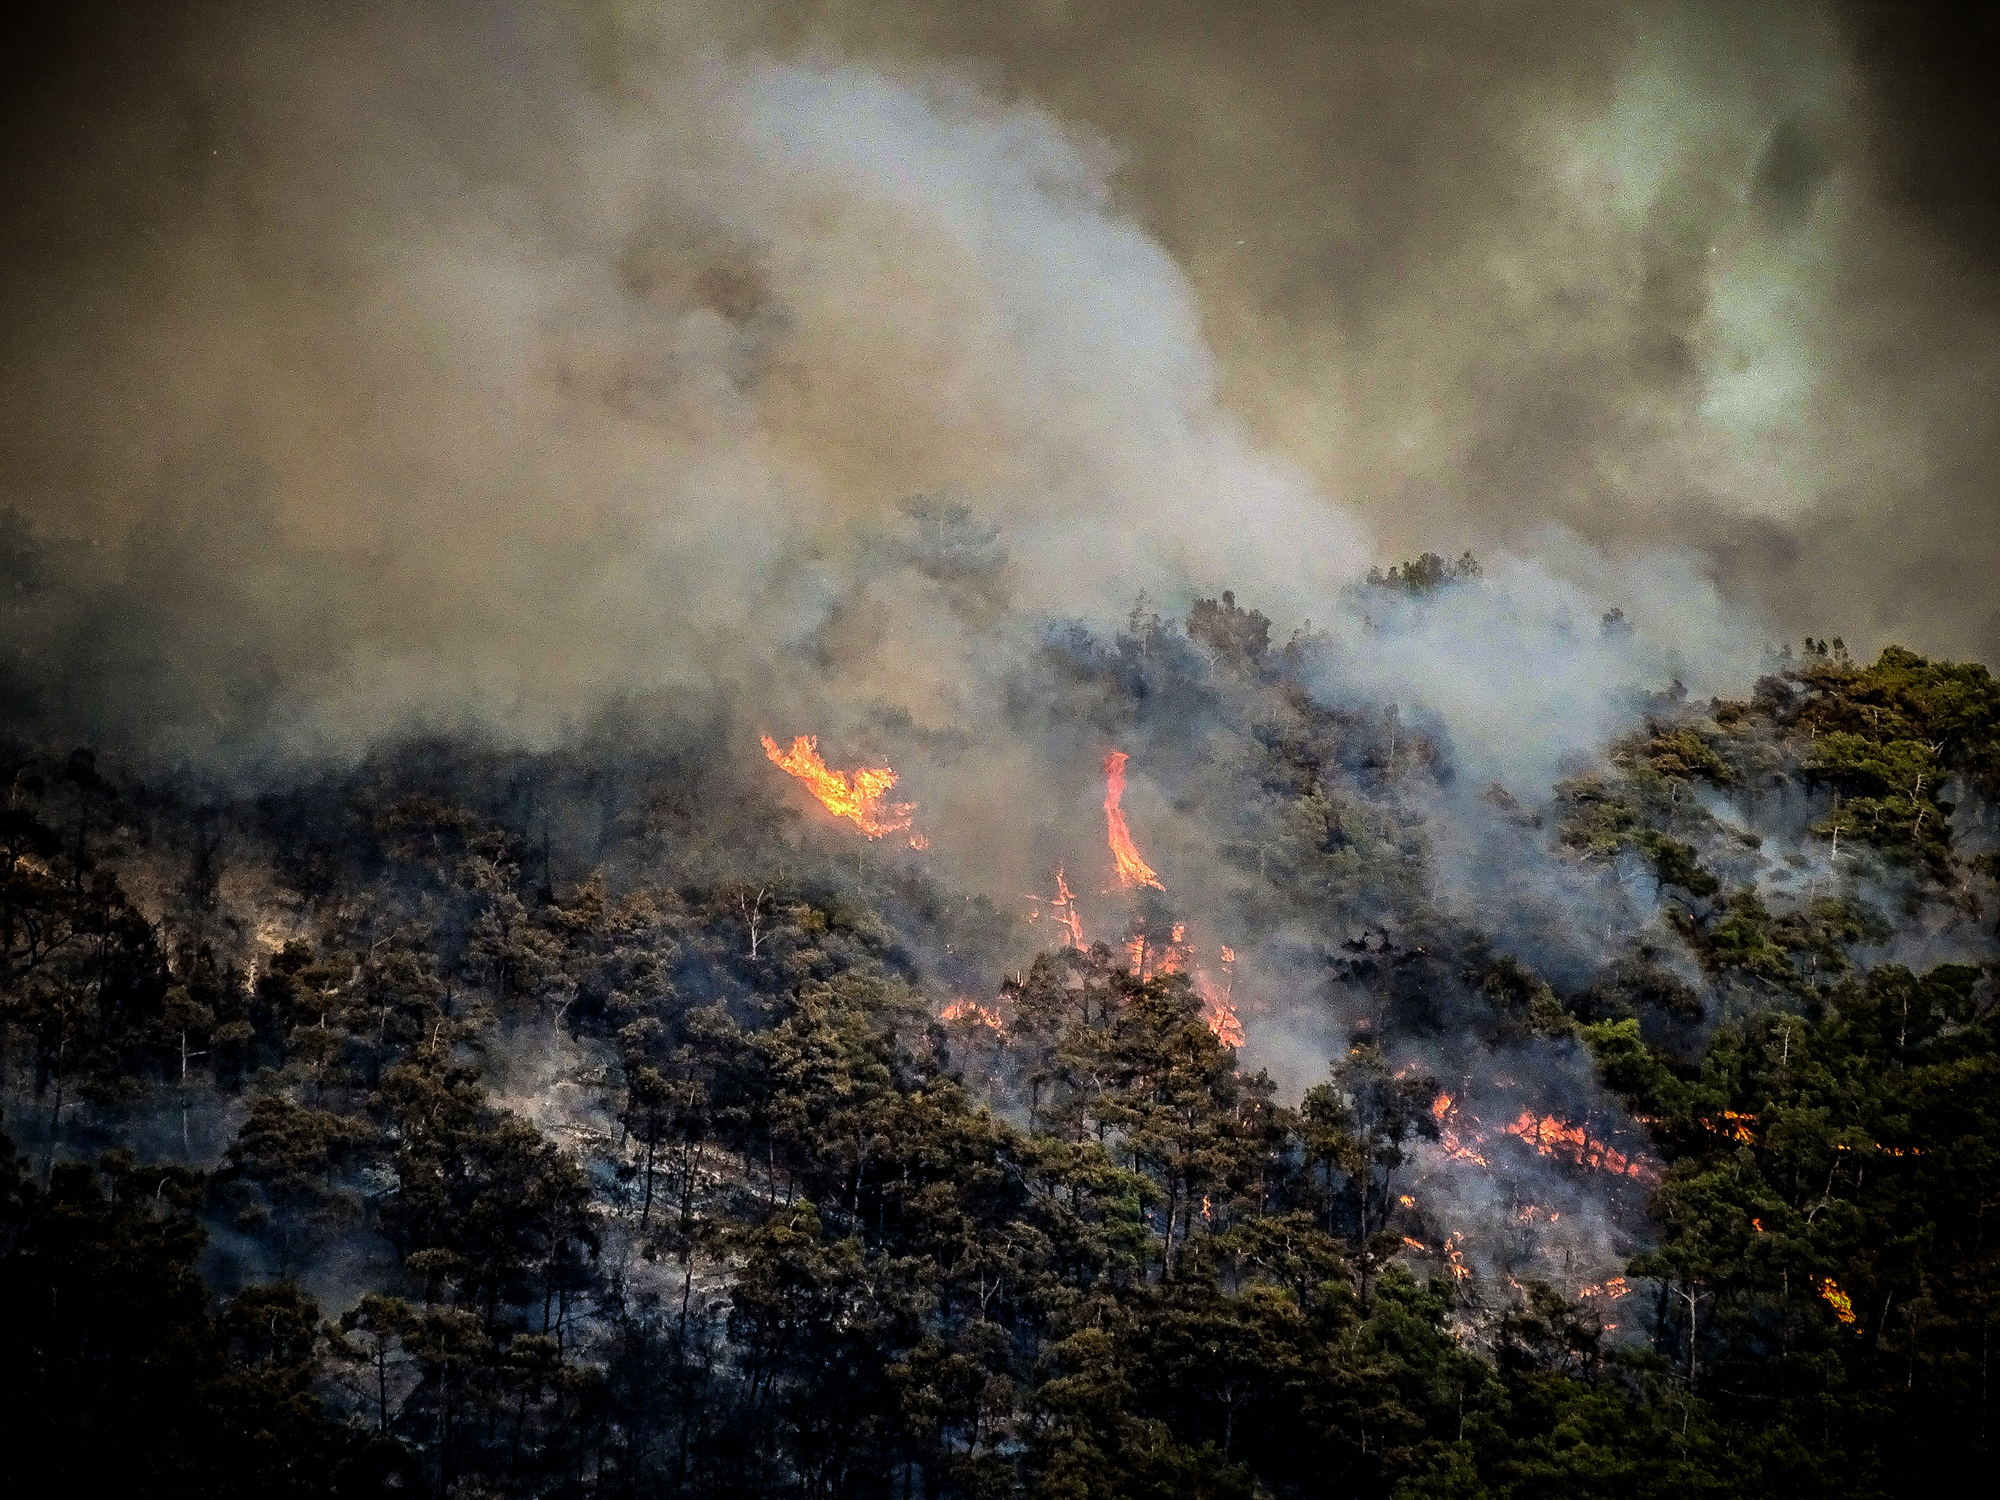 Four major wildfire fronts in Greece on Sun. evening; Rhodes blaze burns for sixth day